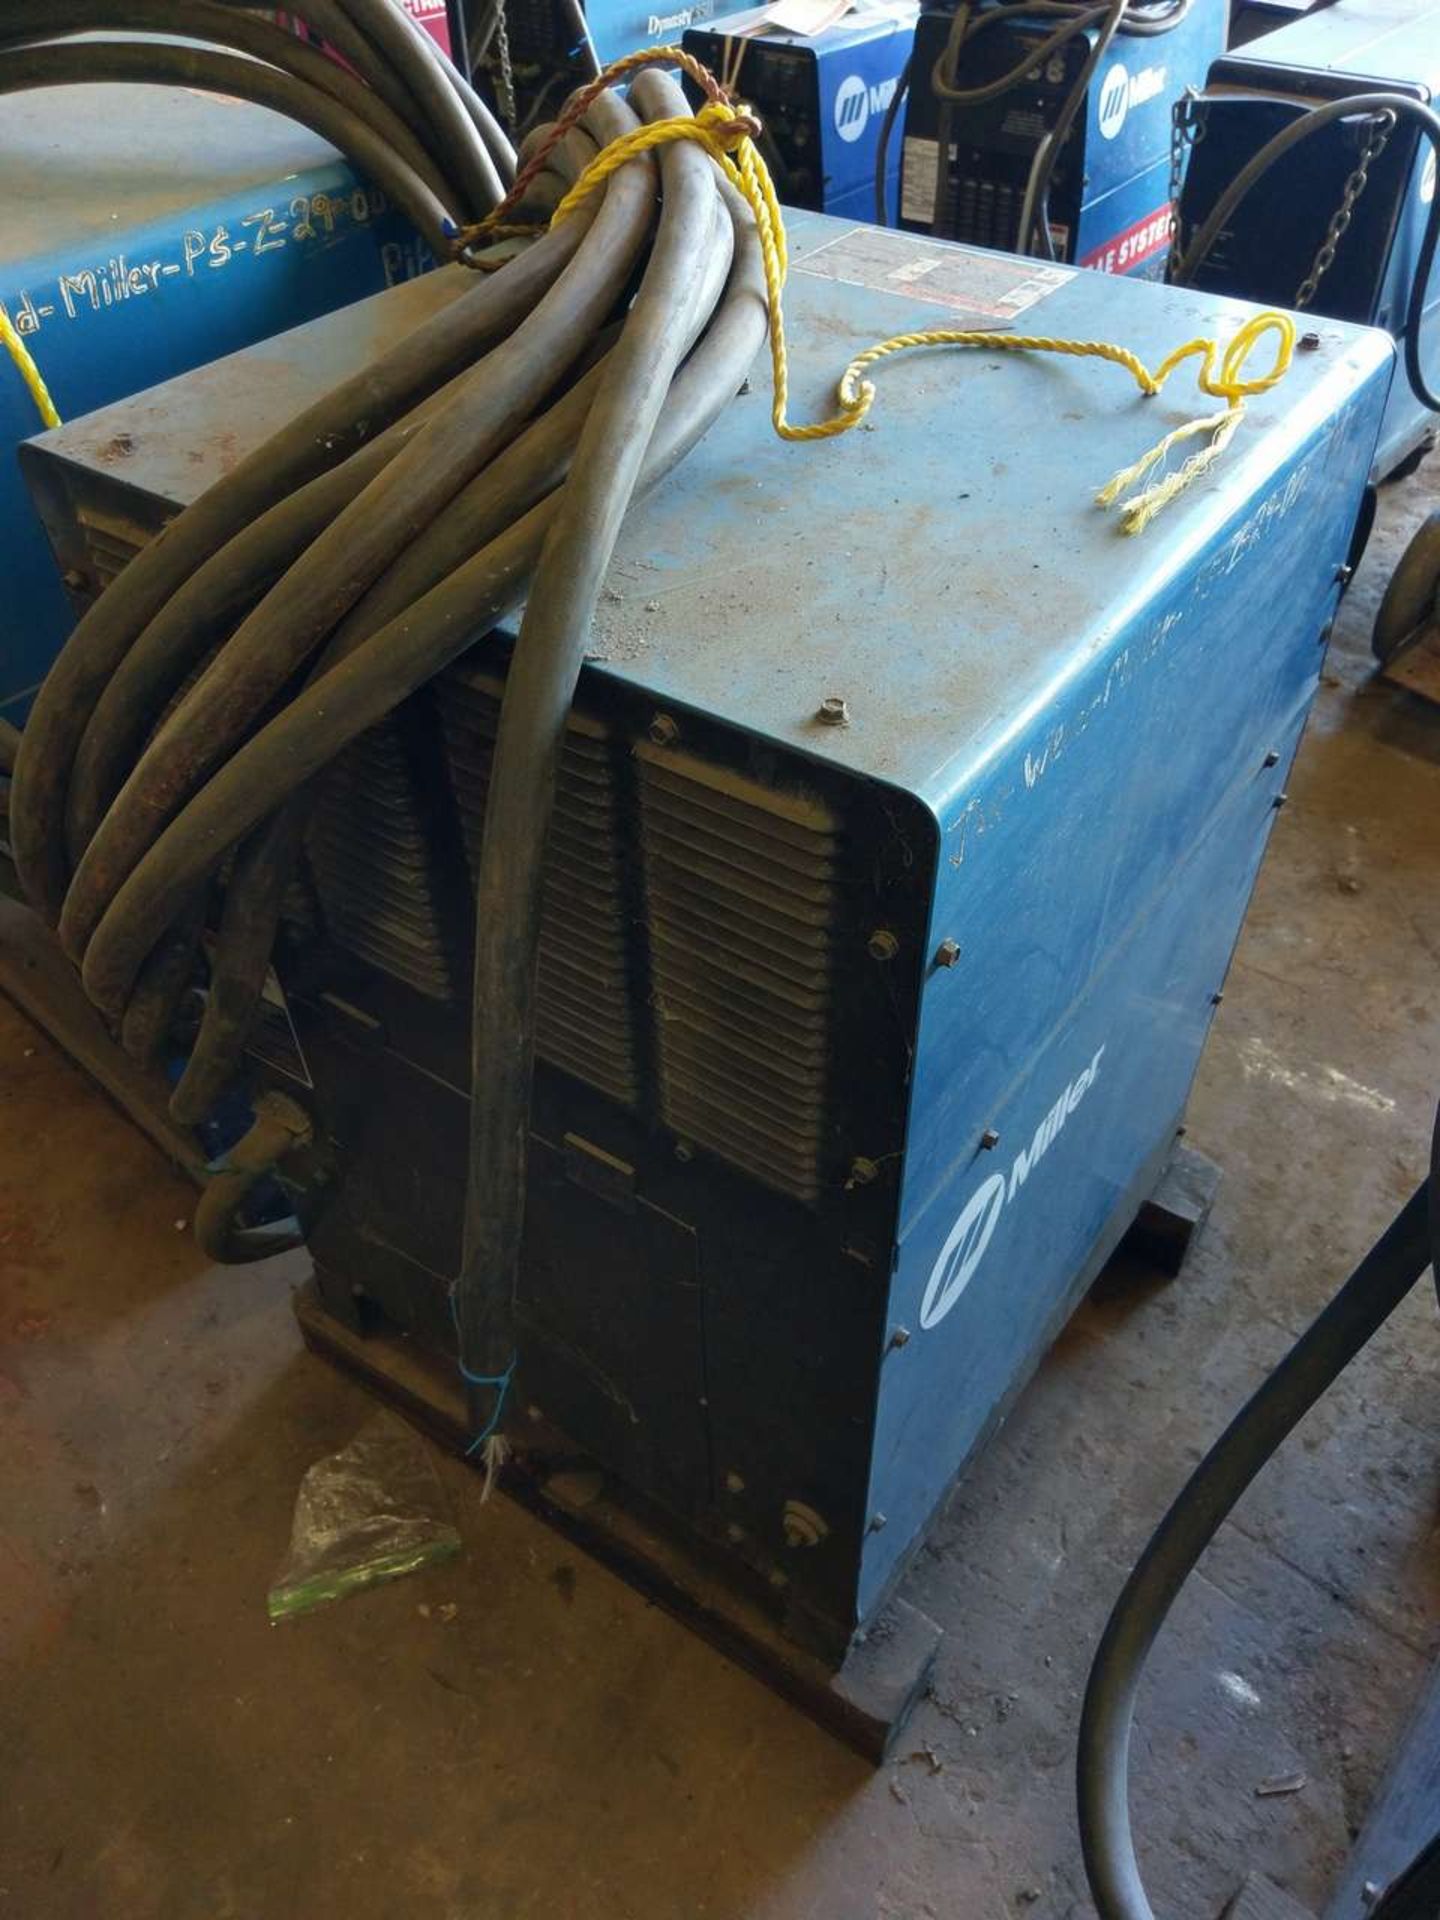 Miller Syncrowave 350LX CC AC/DC Square Wave Welding Power Source - Image 6 of 6